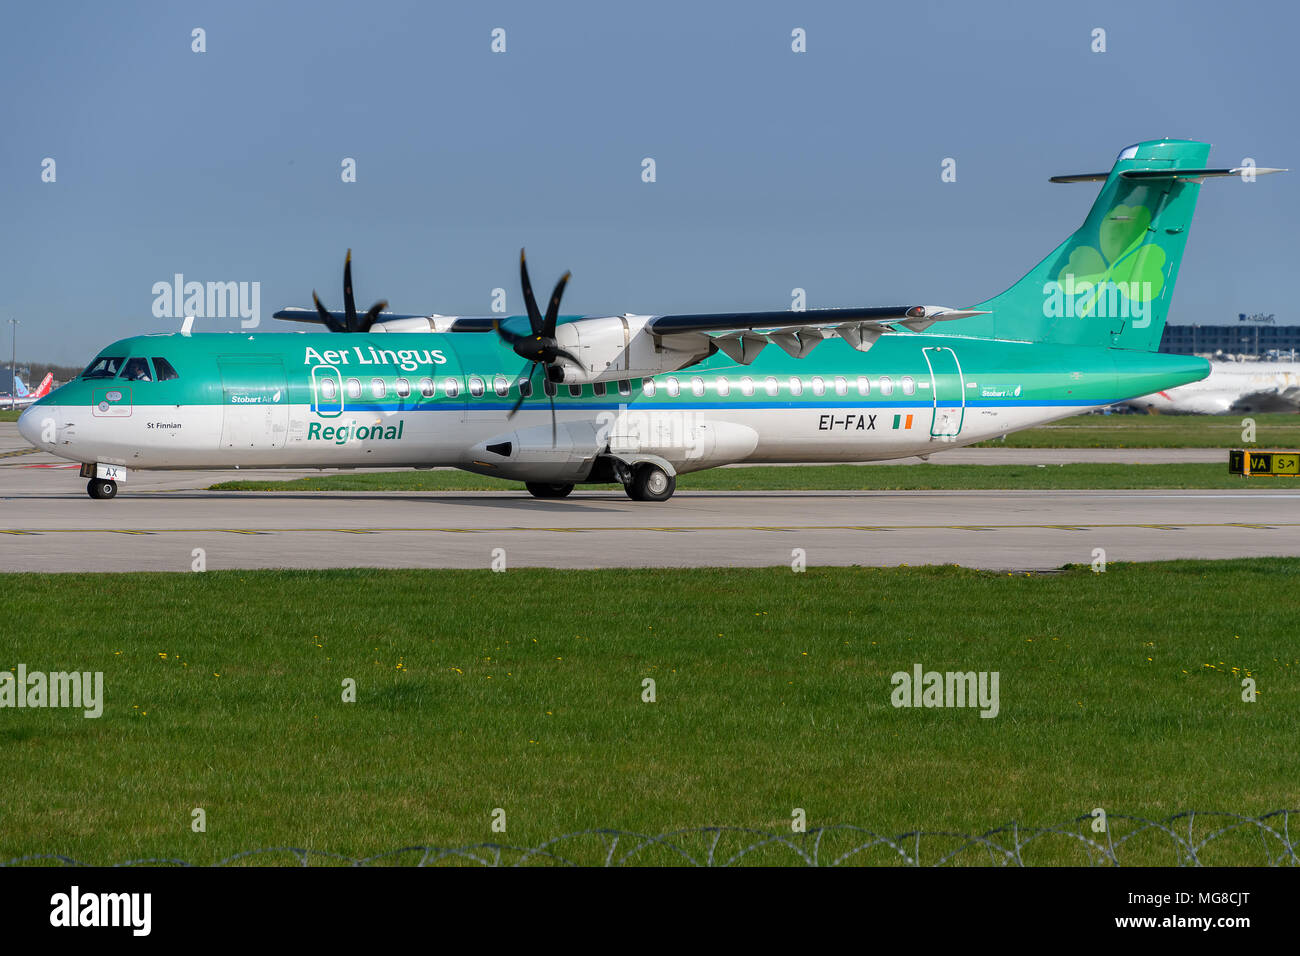 MANCHESTER, UNITED KINGDOM - APRIL 21st, 2018: Aer Lingus ATR 72-600 ready to depart at Manchester Airport Stock Photo